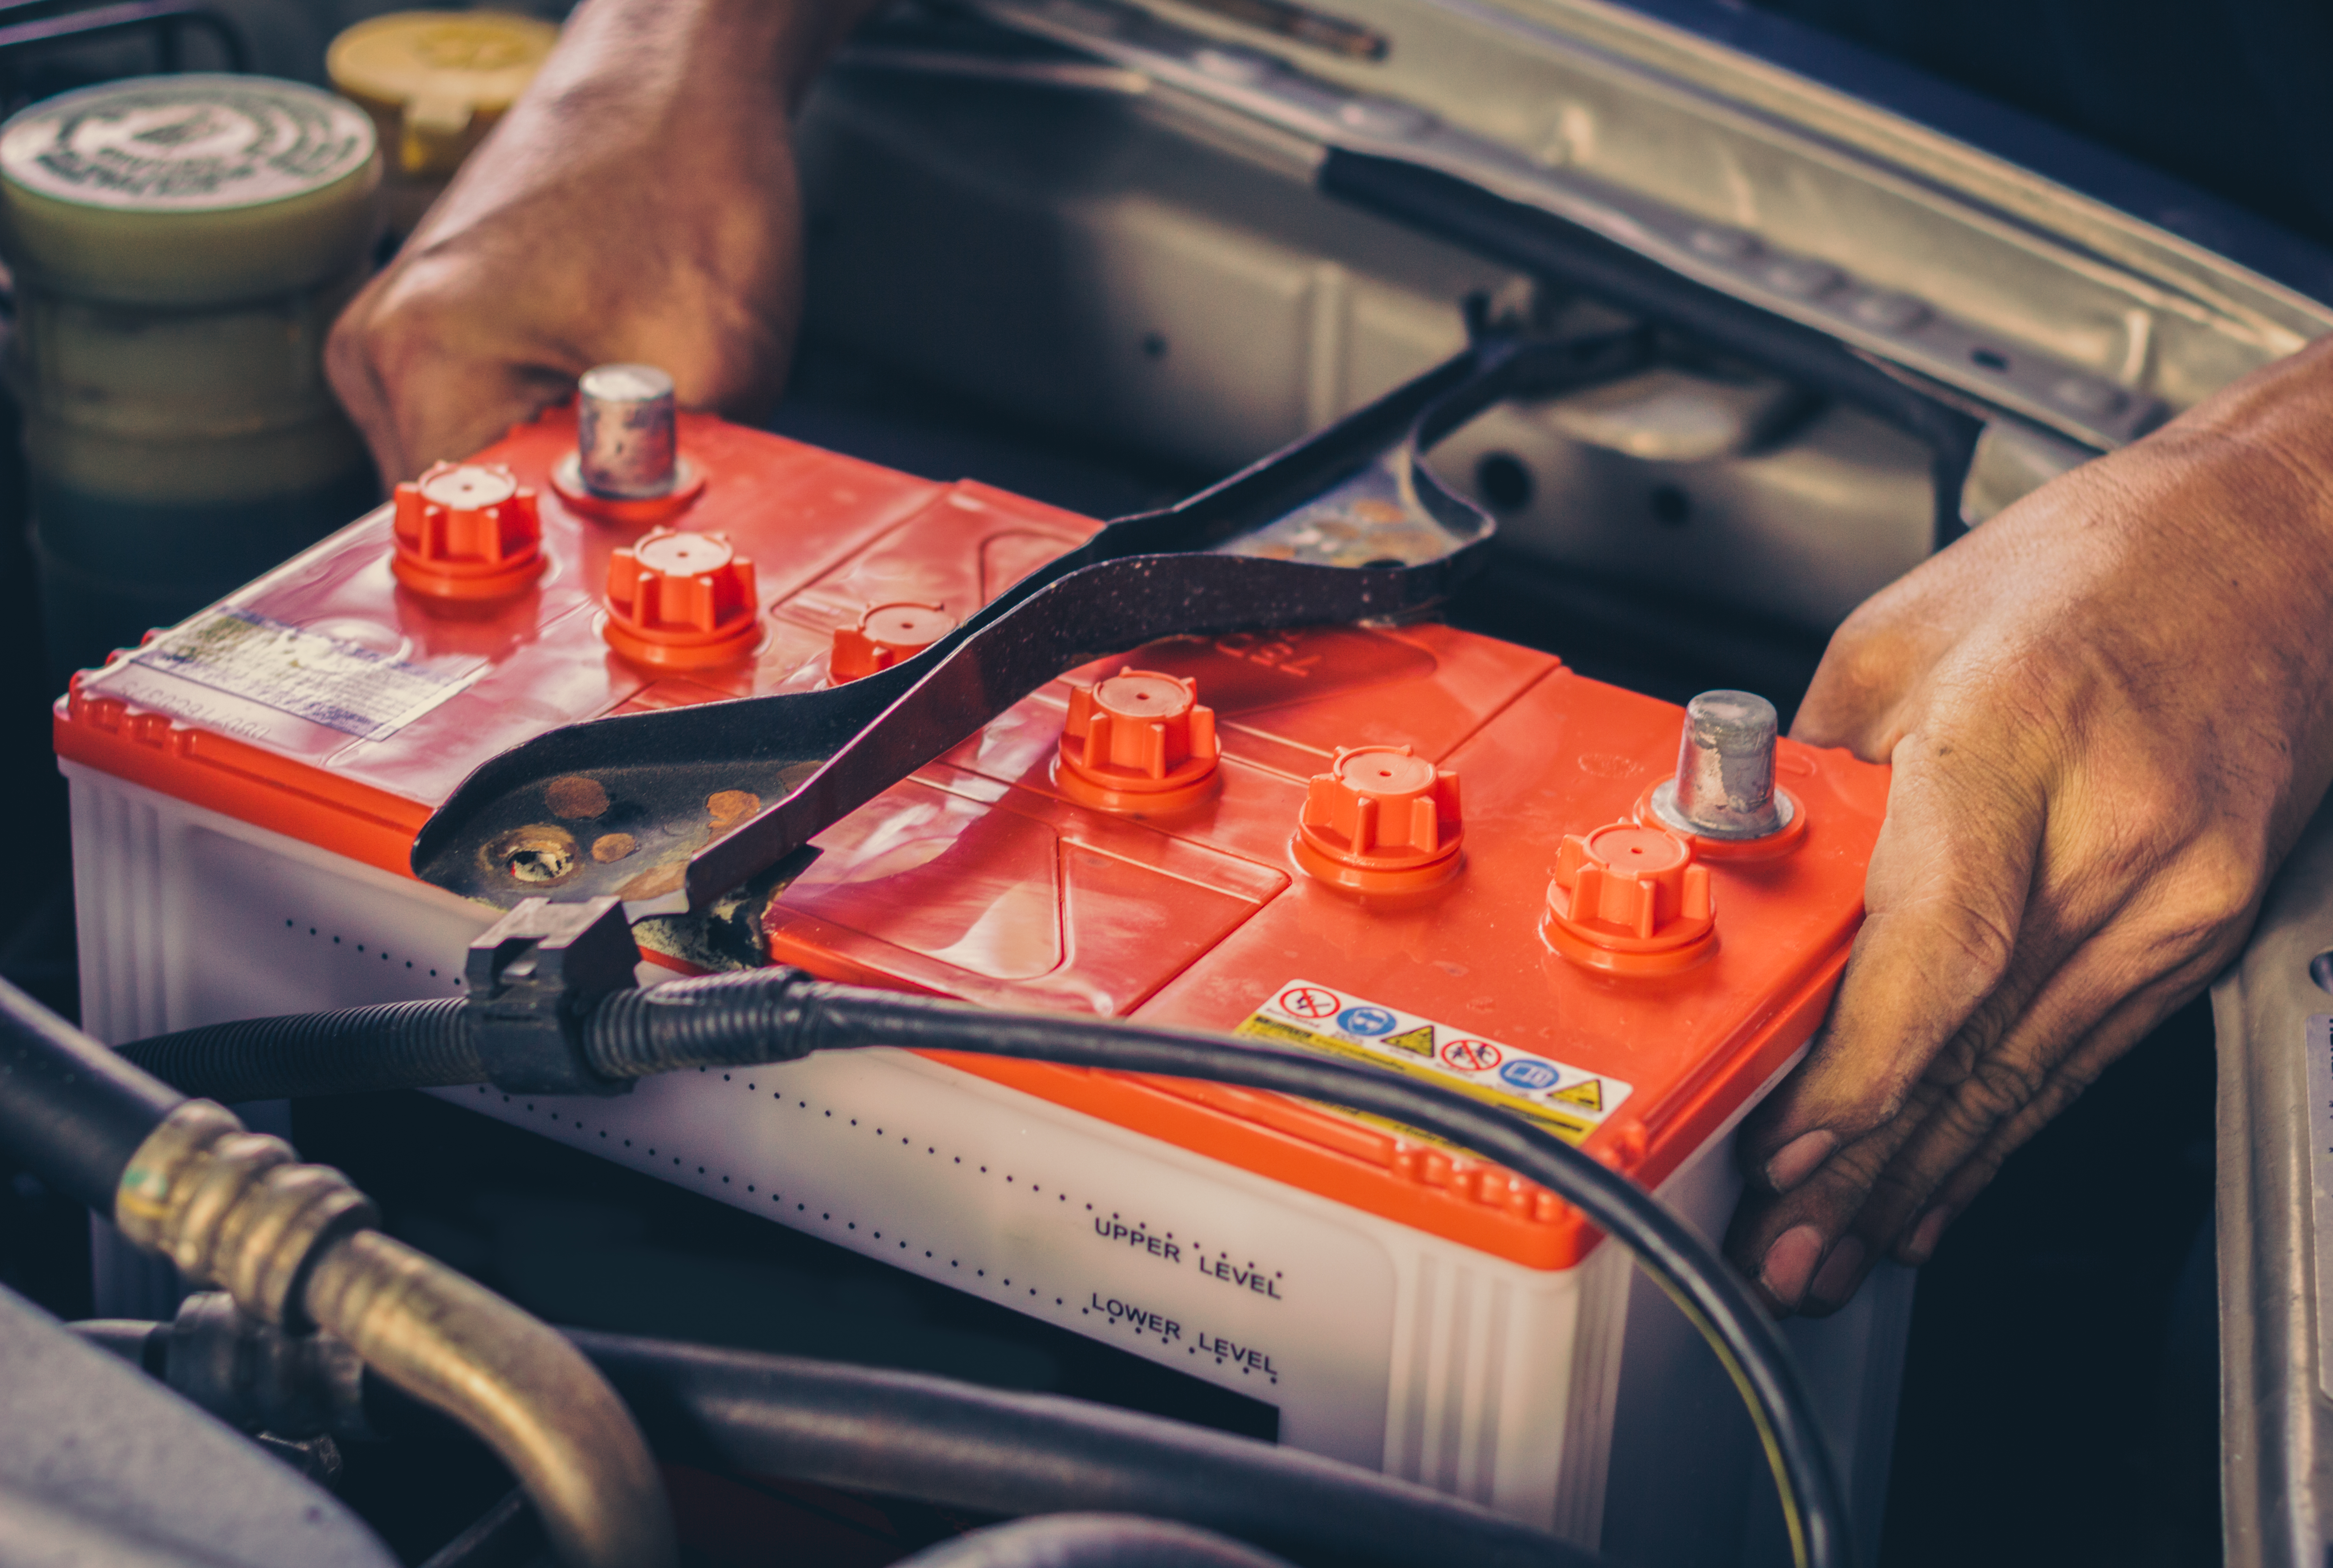 How to prolong the life of your car battery?